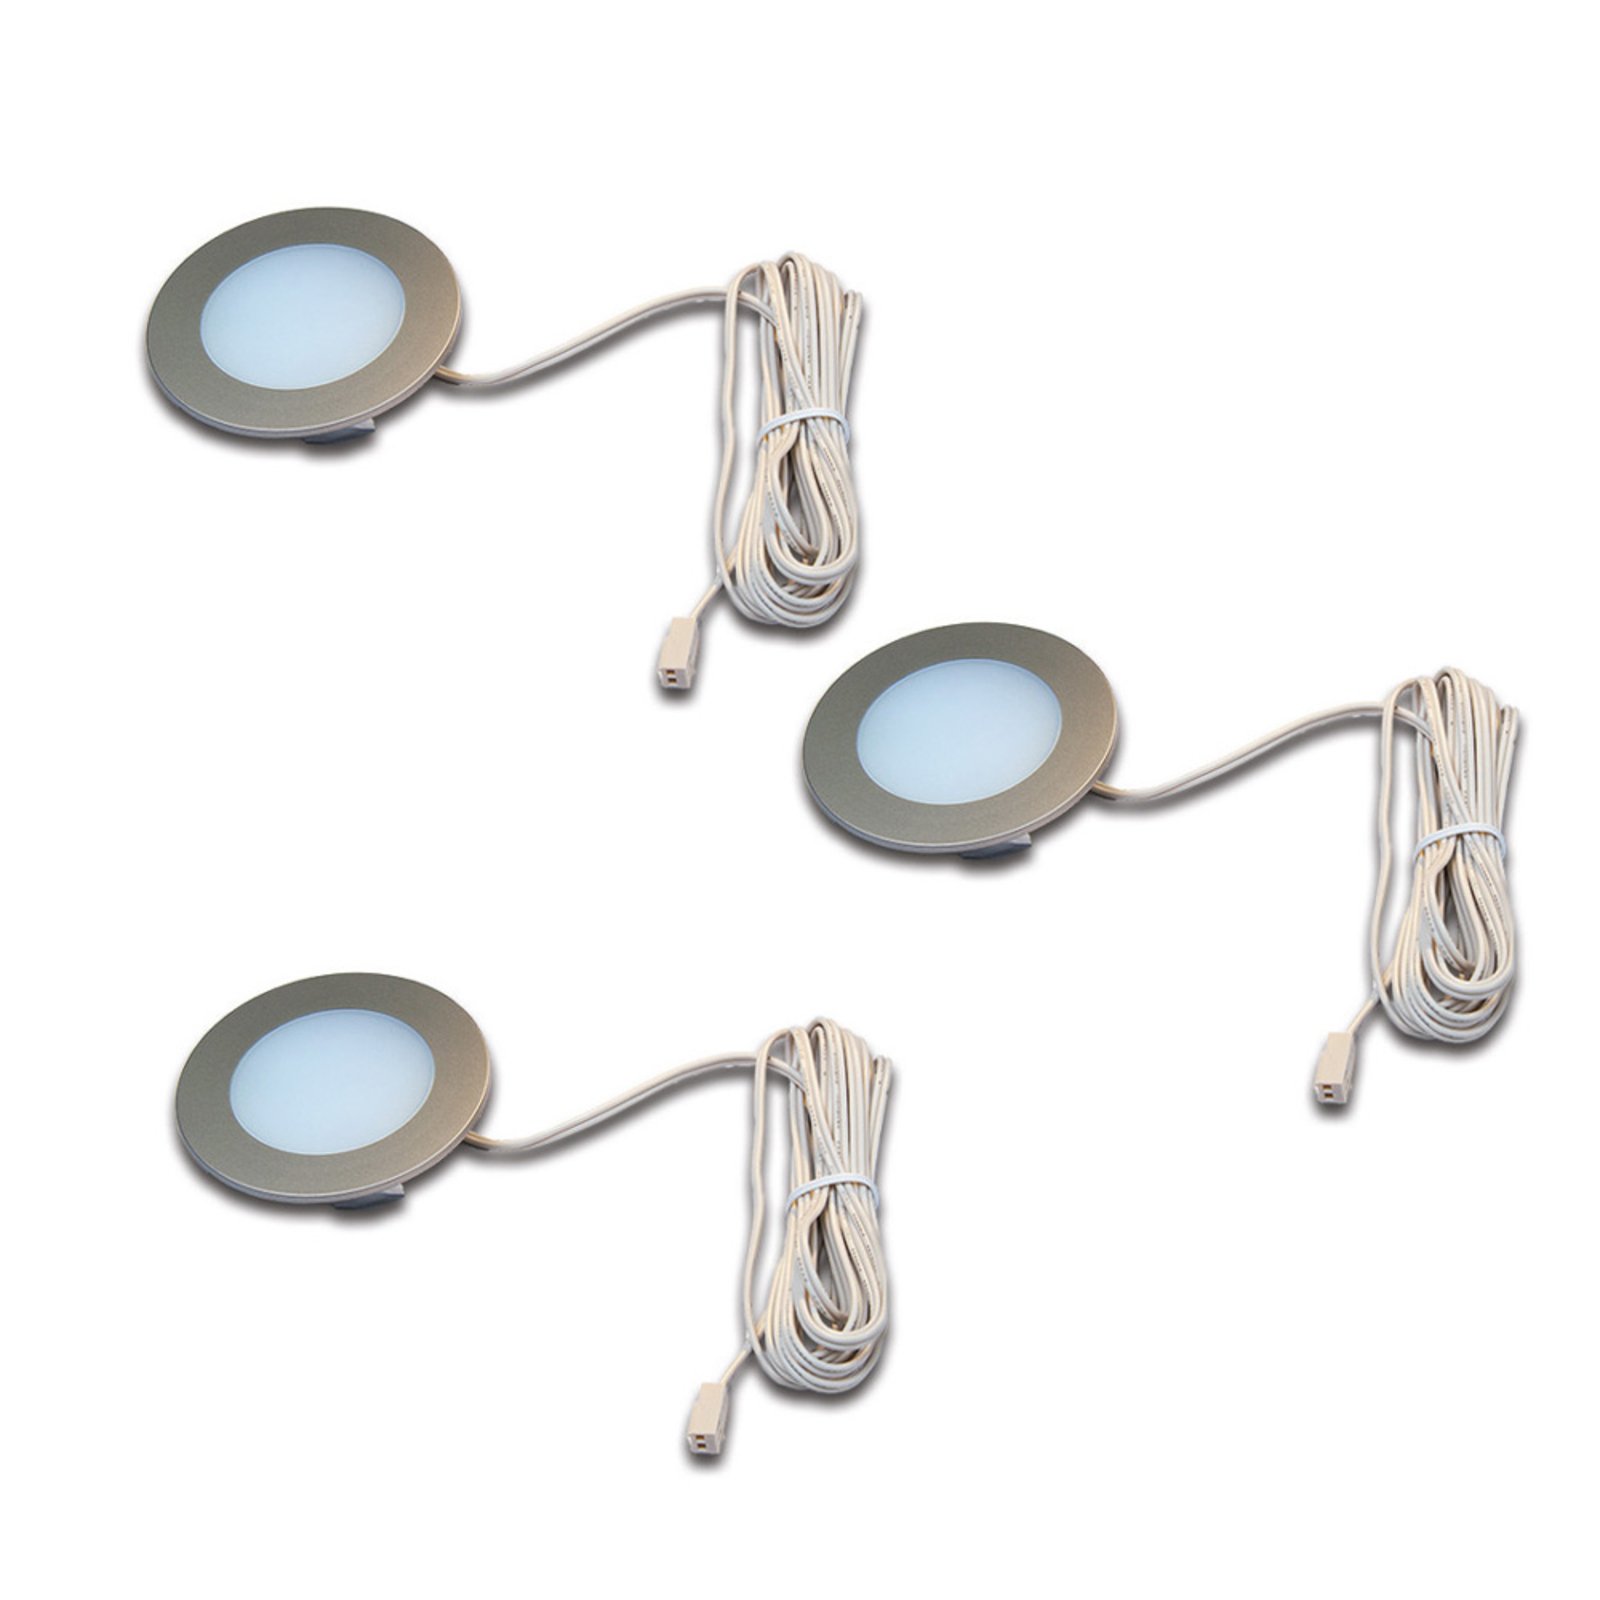 FR 55 LED furniture lamp stainless steel set of 3